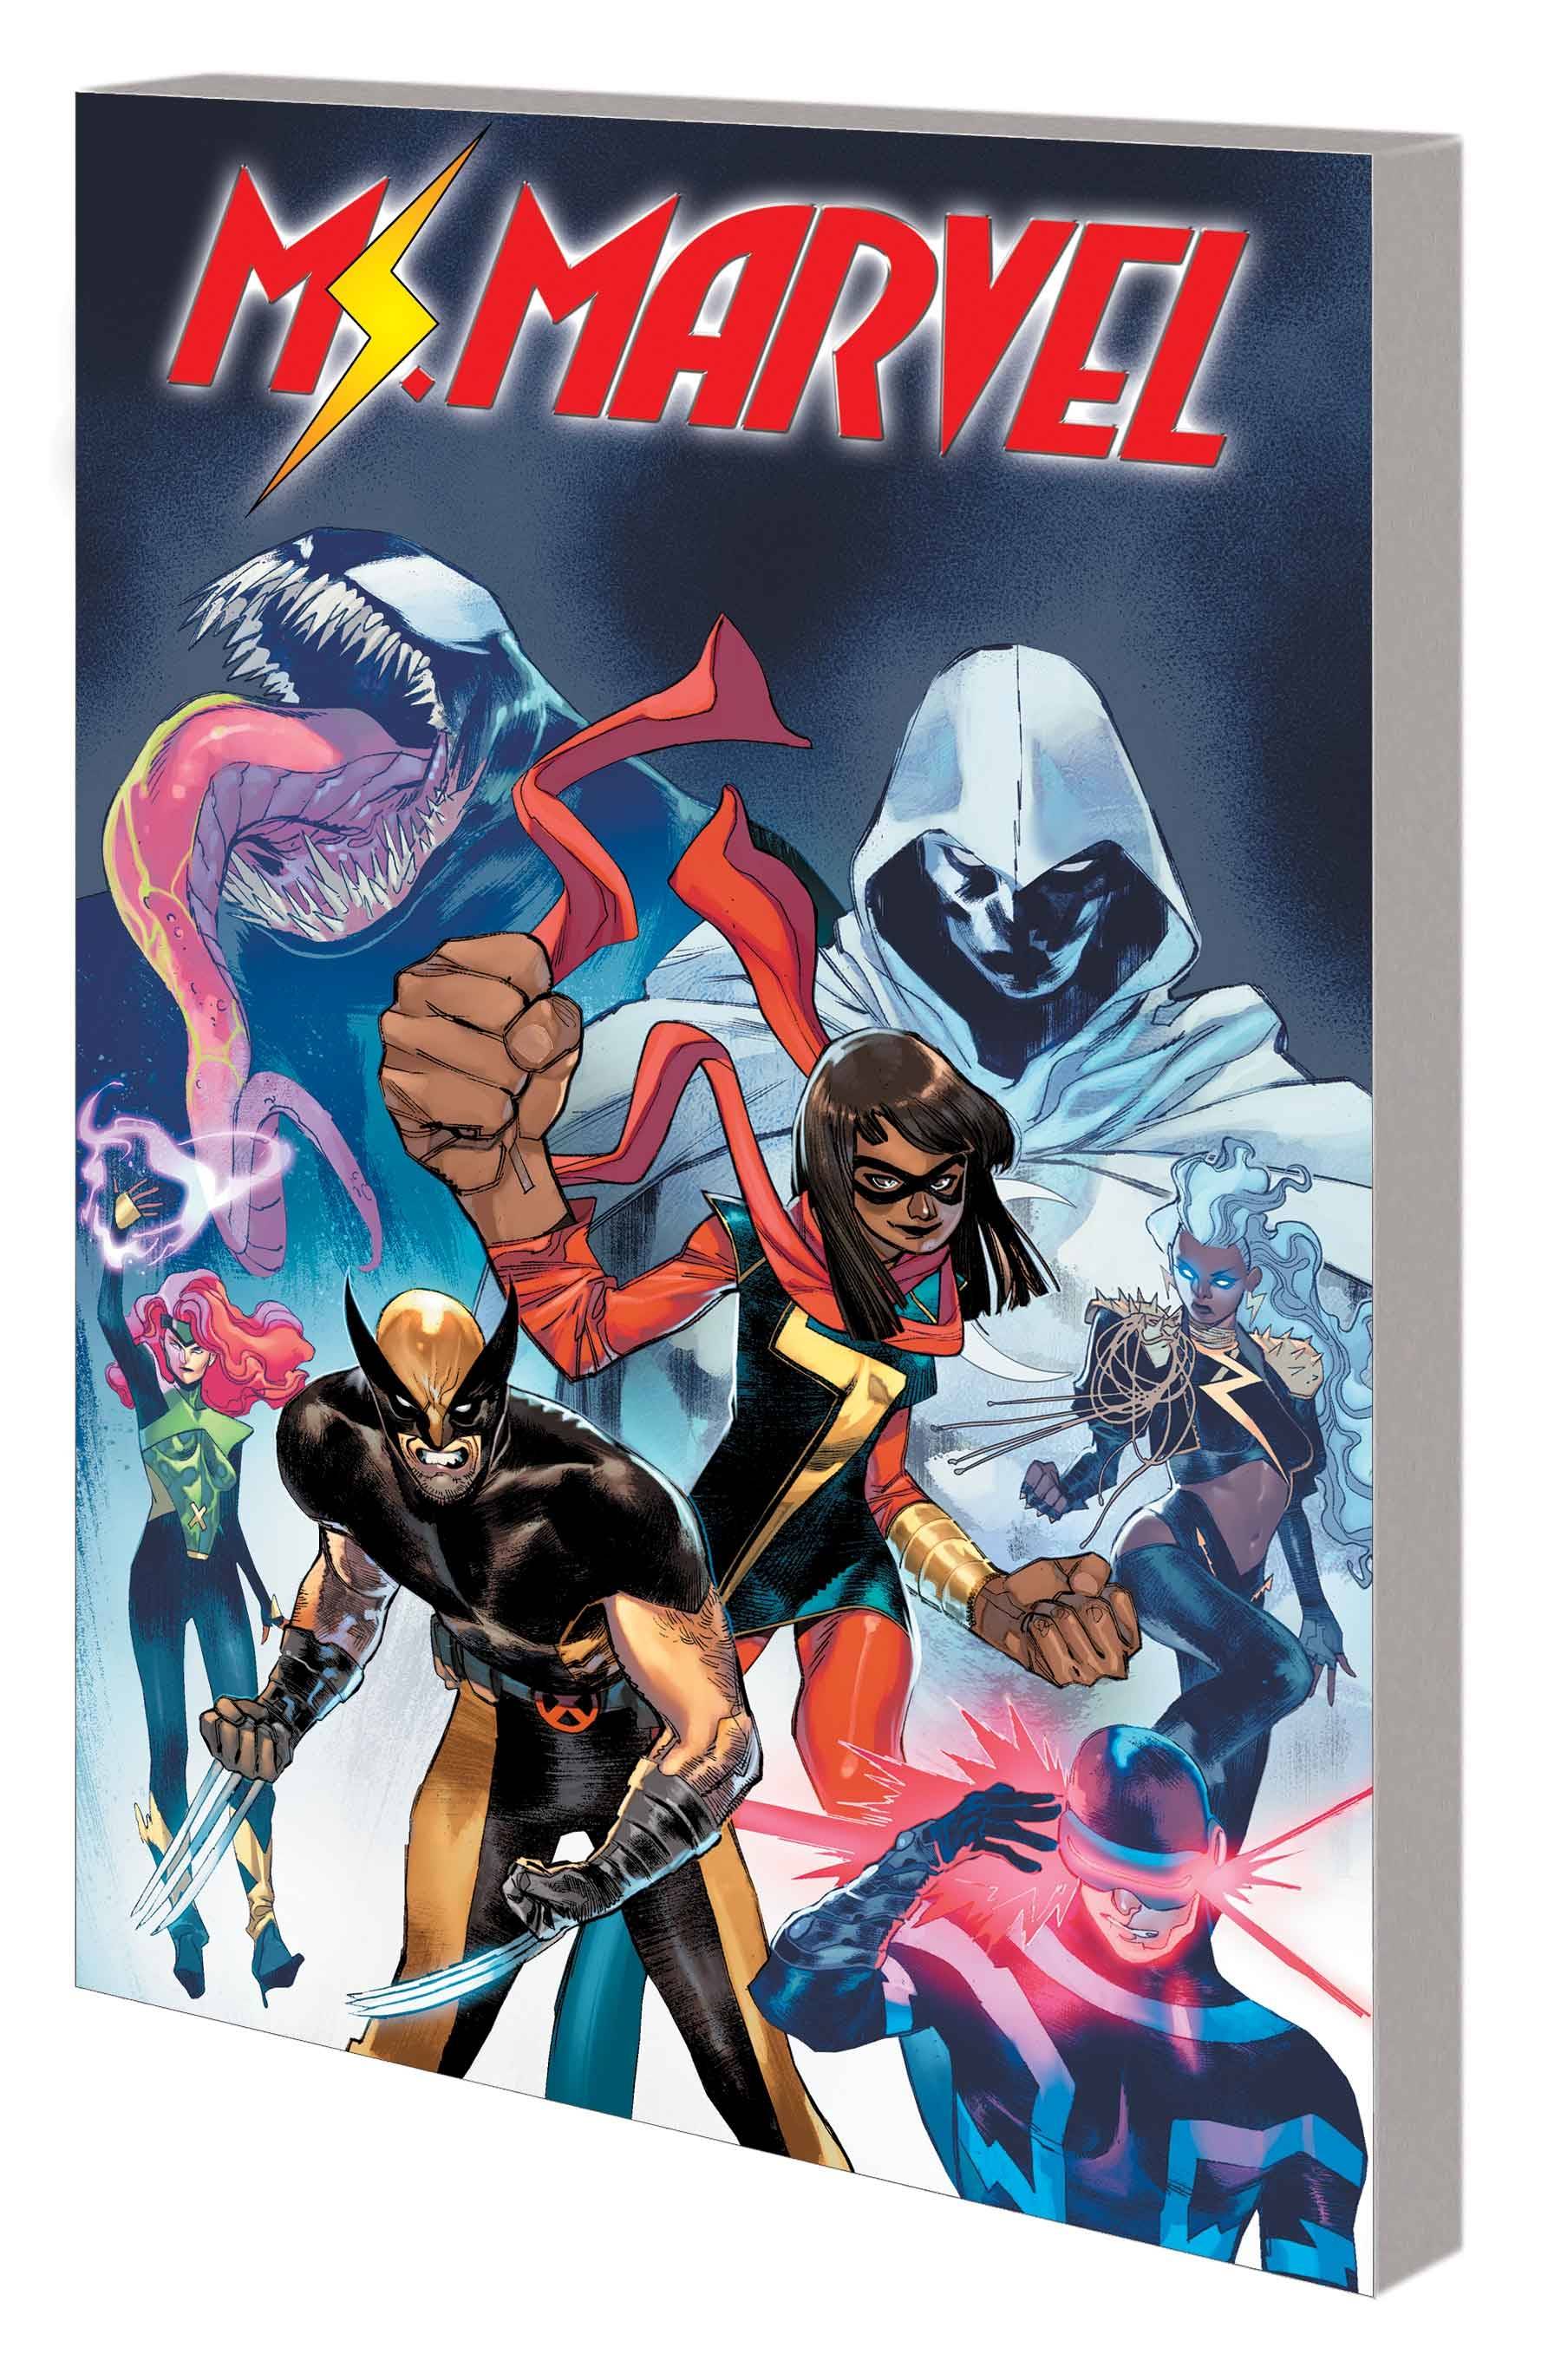 MS MARVEL FISTS OF JUSTICE TP